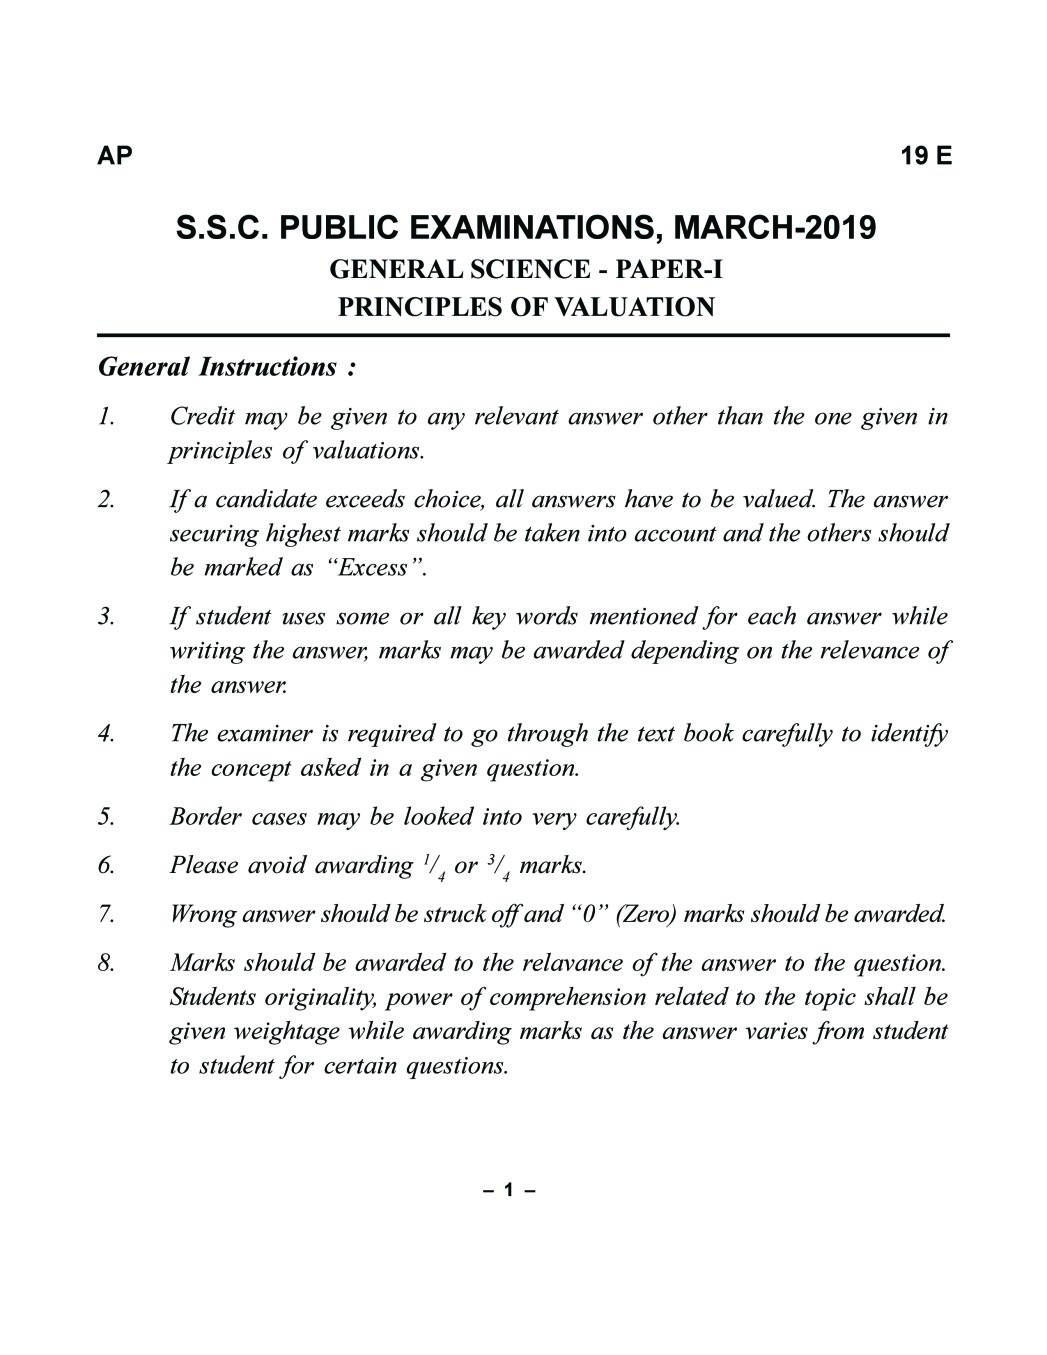 AP 10th Class Marking Scheme 2019 General Science - Paper 1 (English Medium) - Page 1